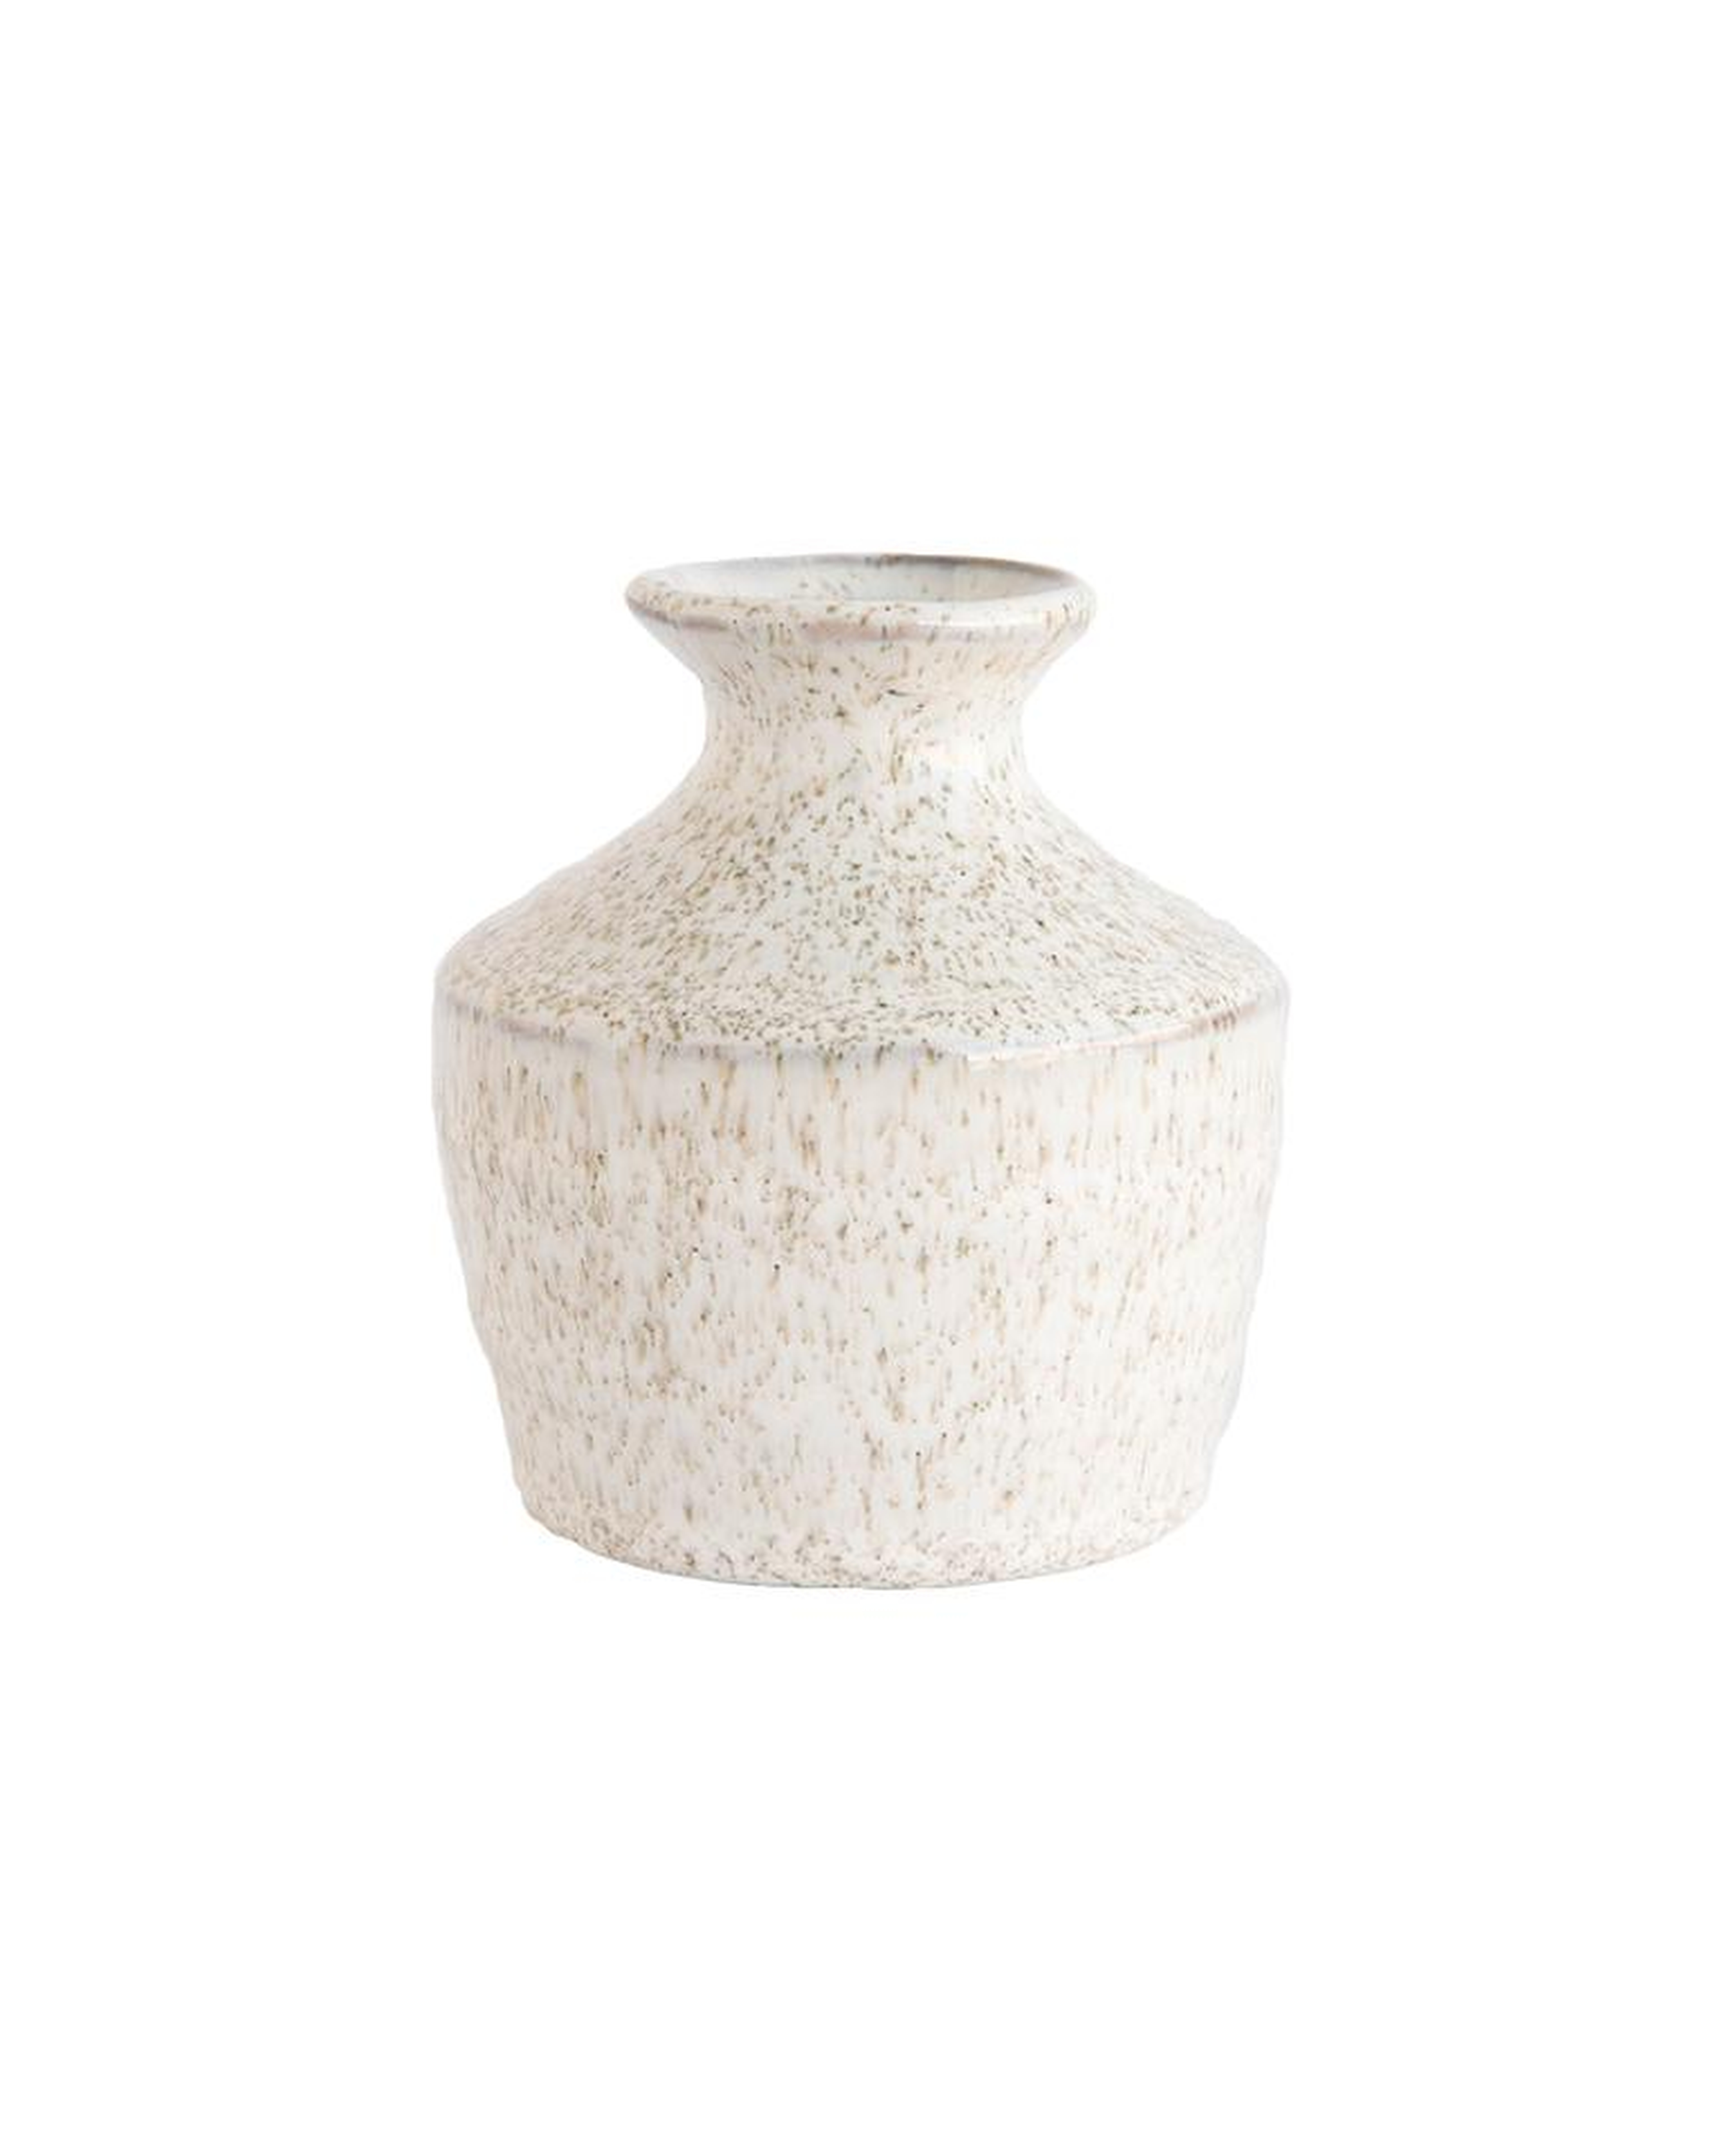 FRECKLED BUDVASE - SMALL - McGee & Co.